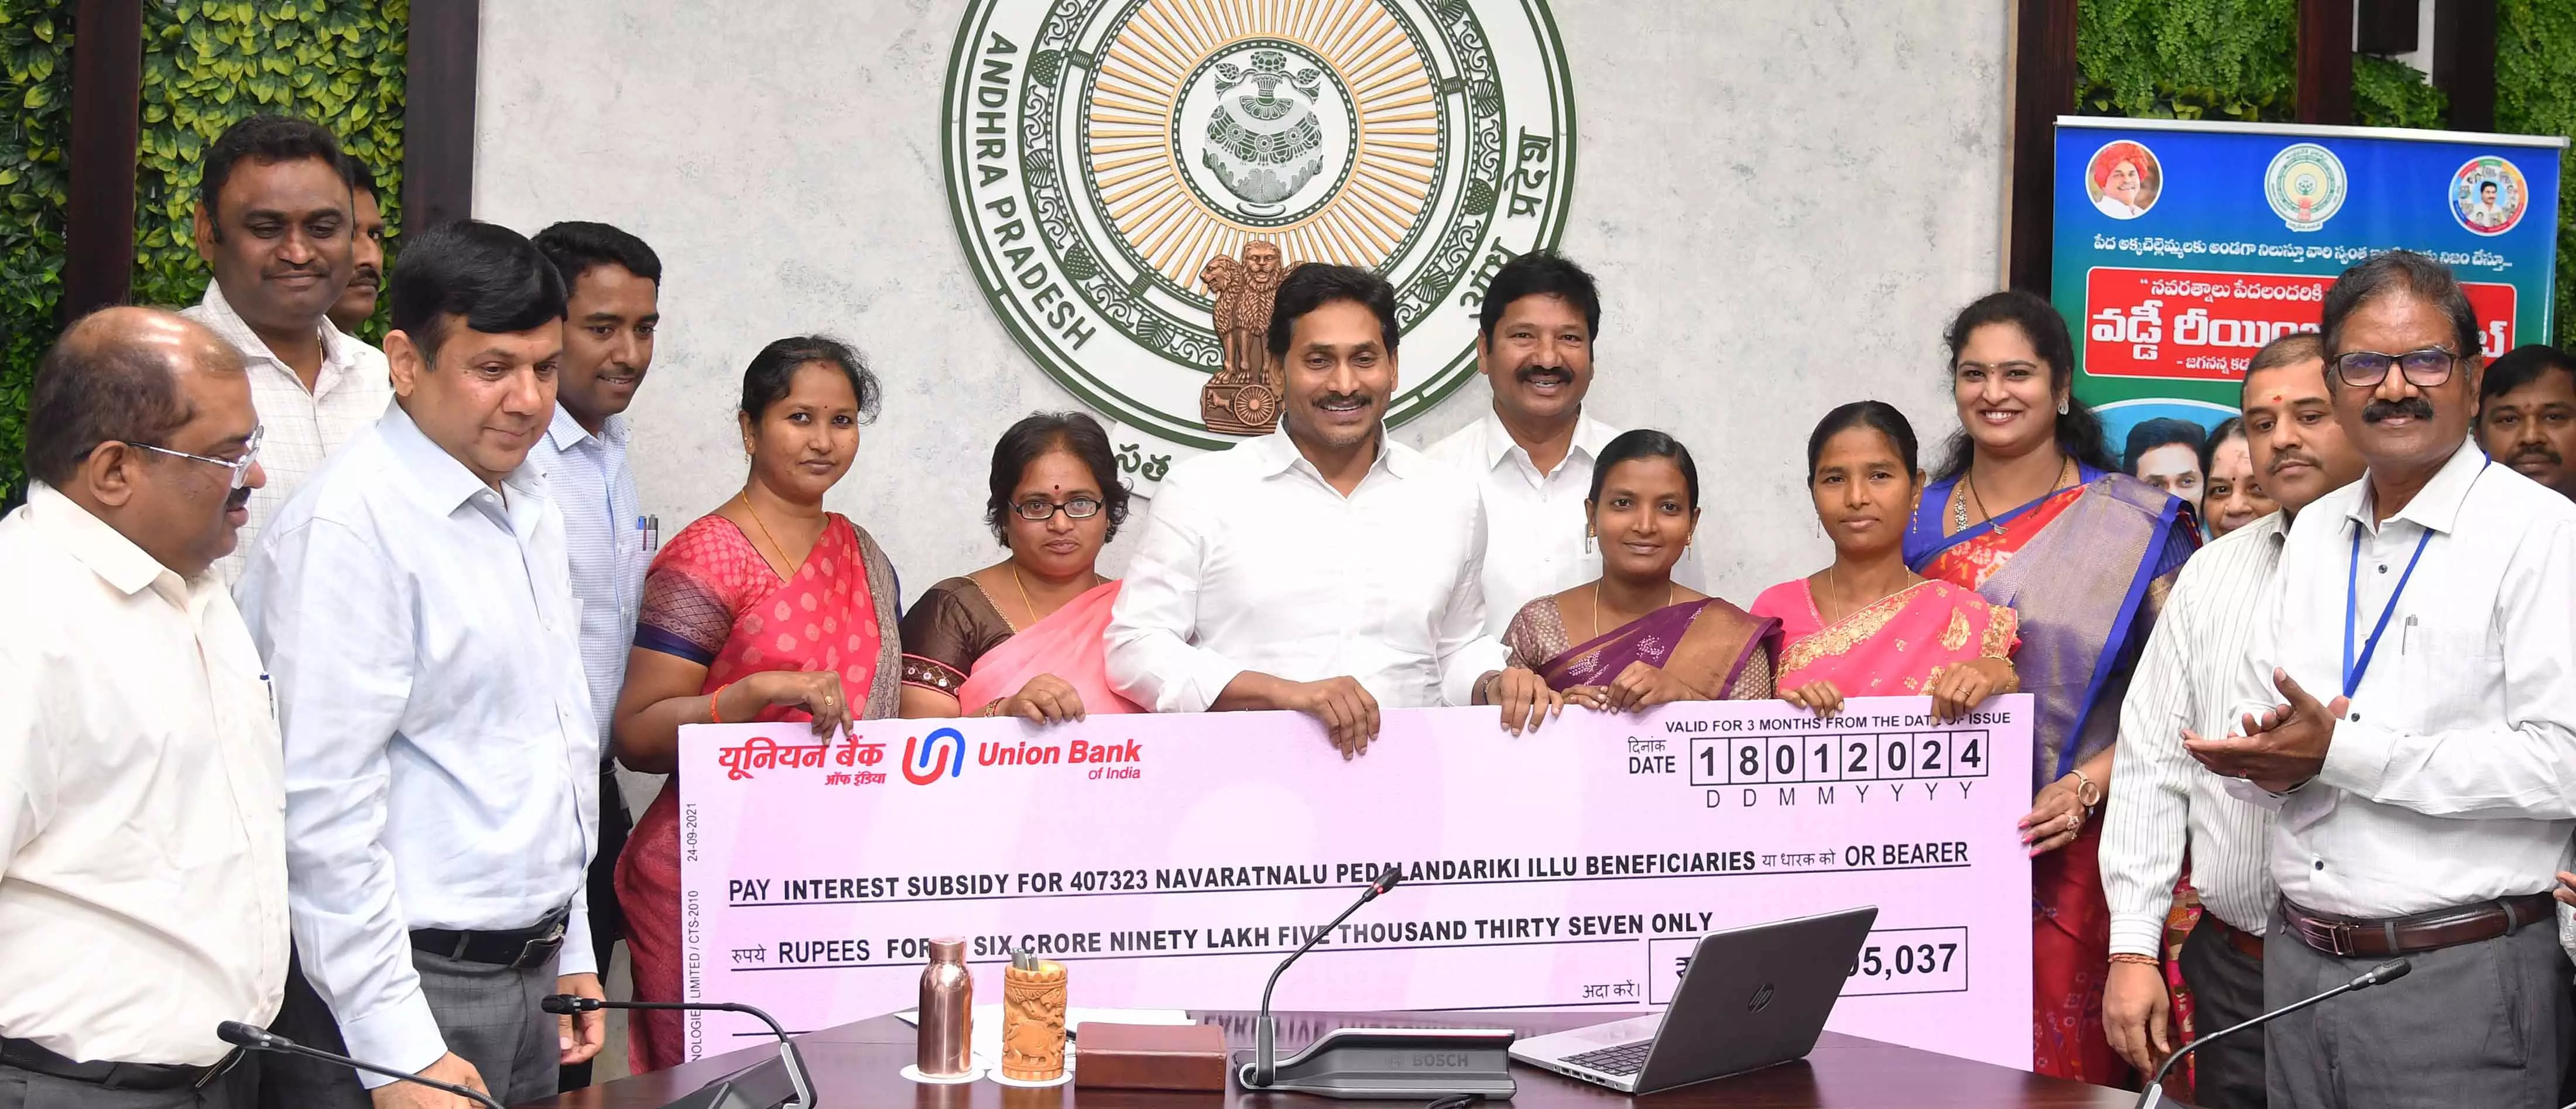 Wealth of up to three lakh crore reached hands of women in AP through free housing scheme: CM Jagan